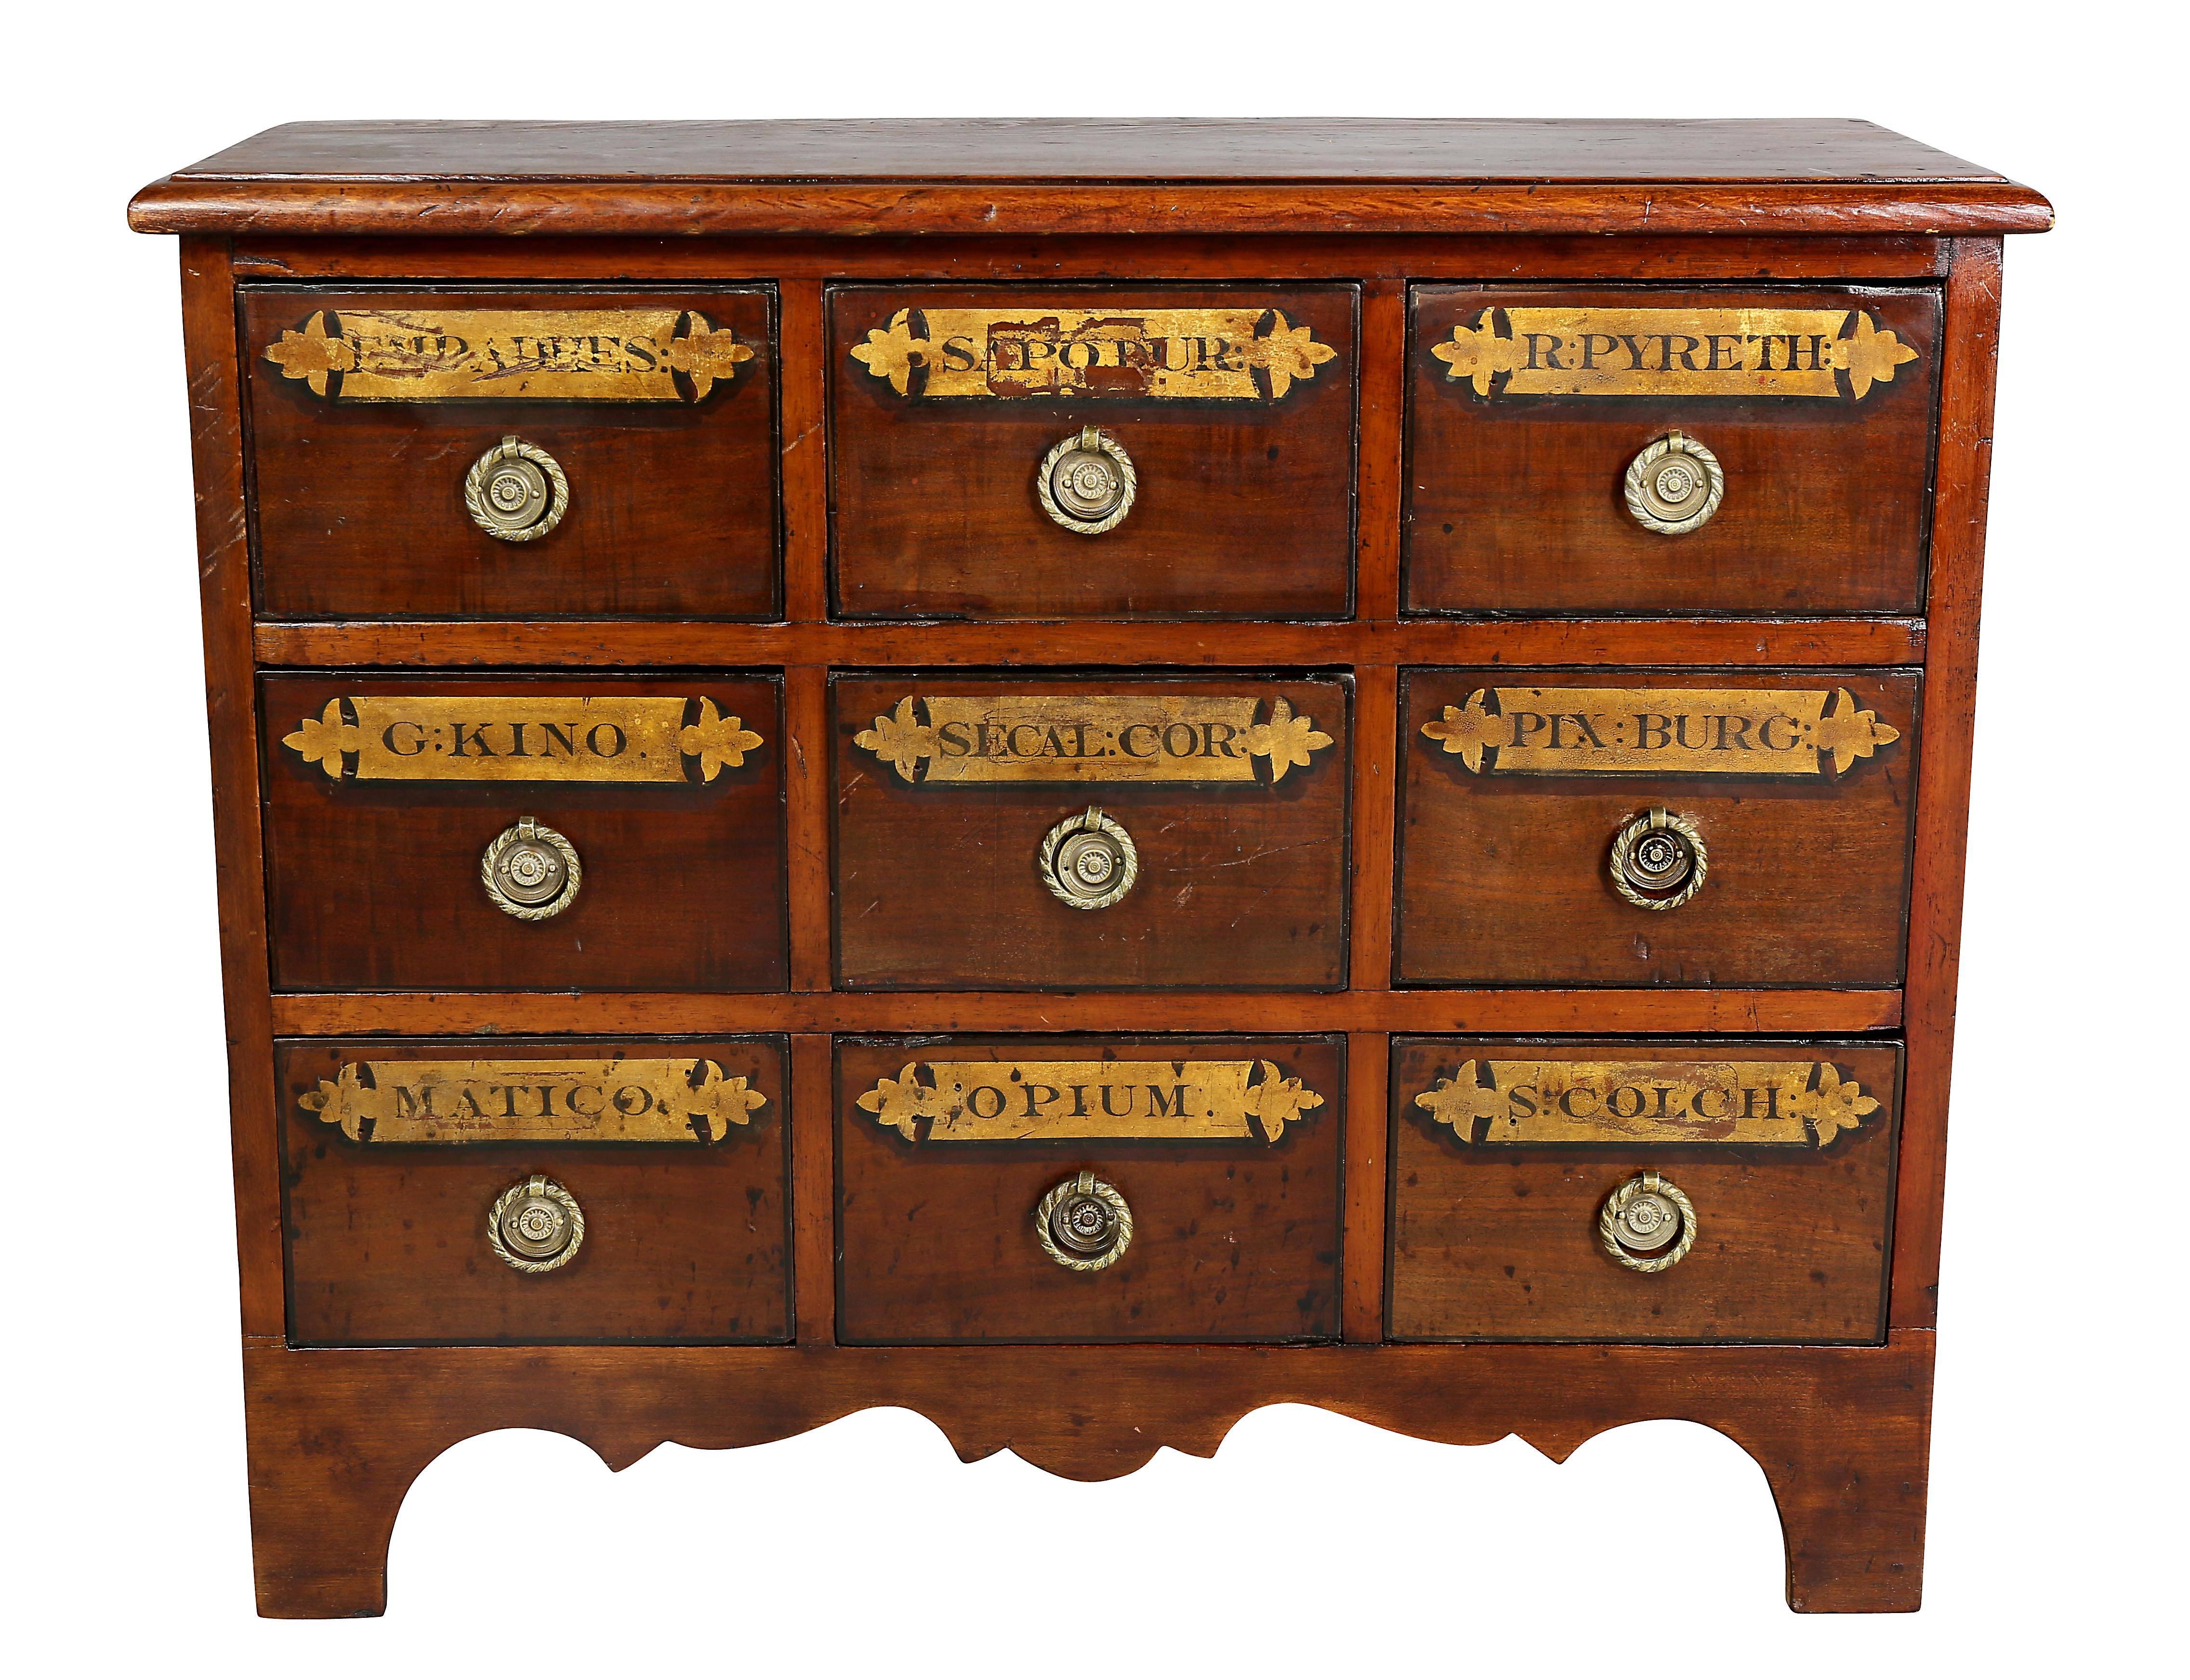 Each rectangular containing nine drawers with labels and brass handles, bracket feet.